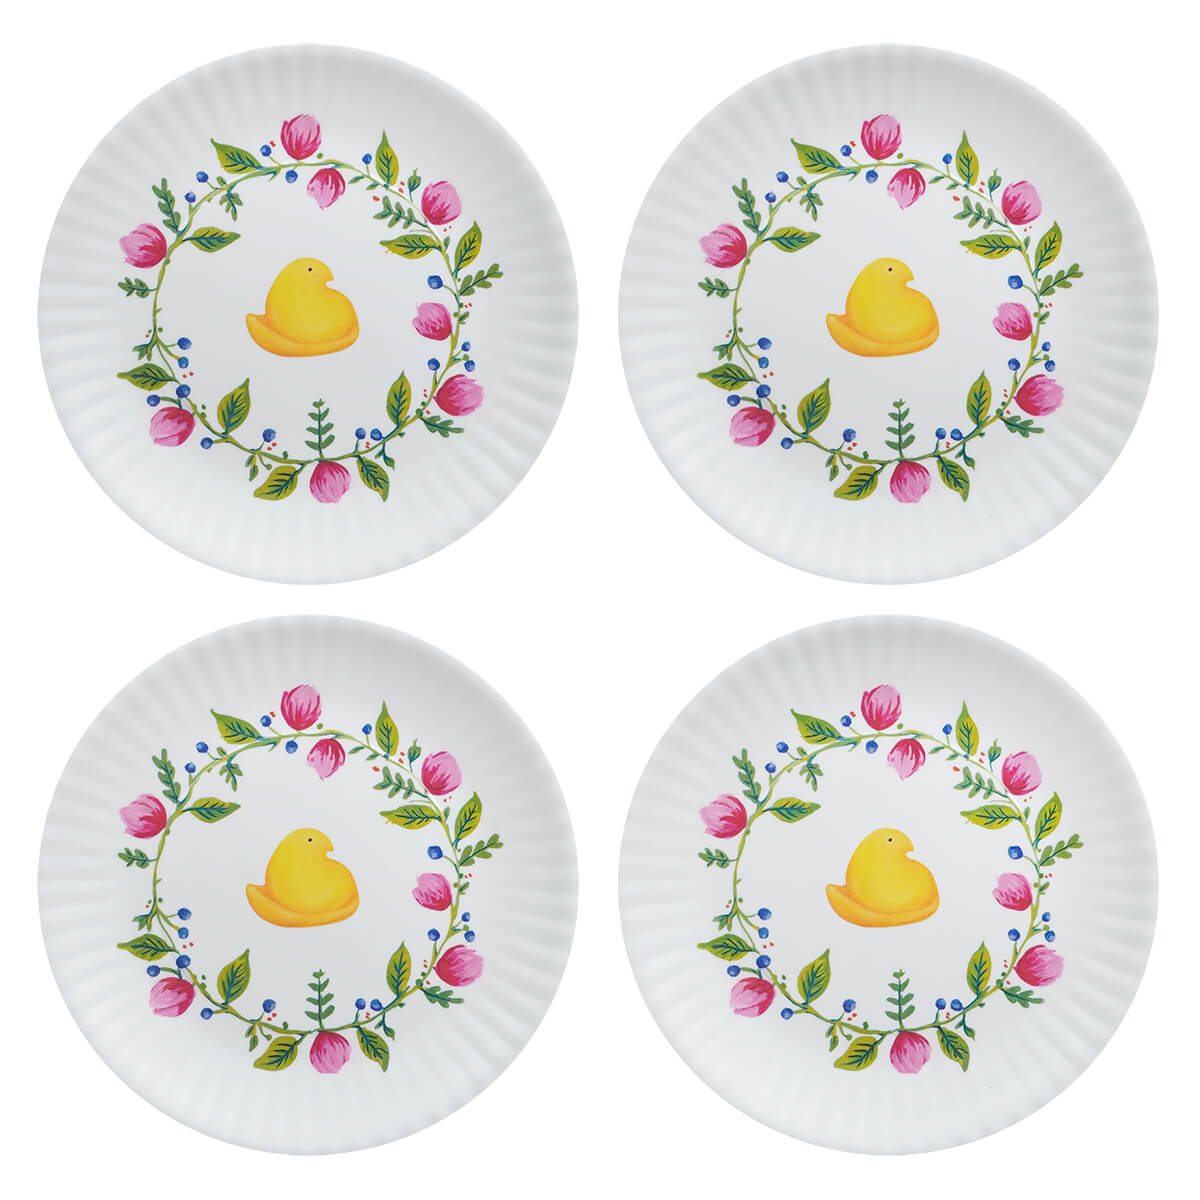 Yellow Chick Peeps Easter Melamine "Paper" Plate With Floral Pattern Set/4